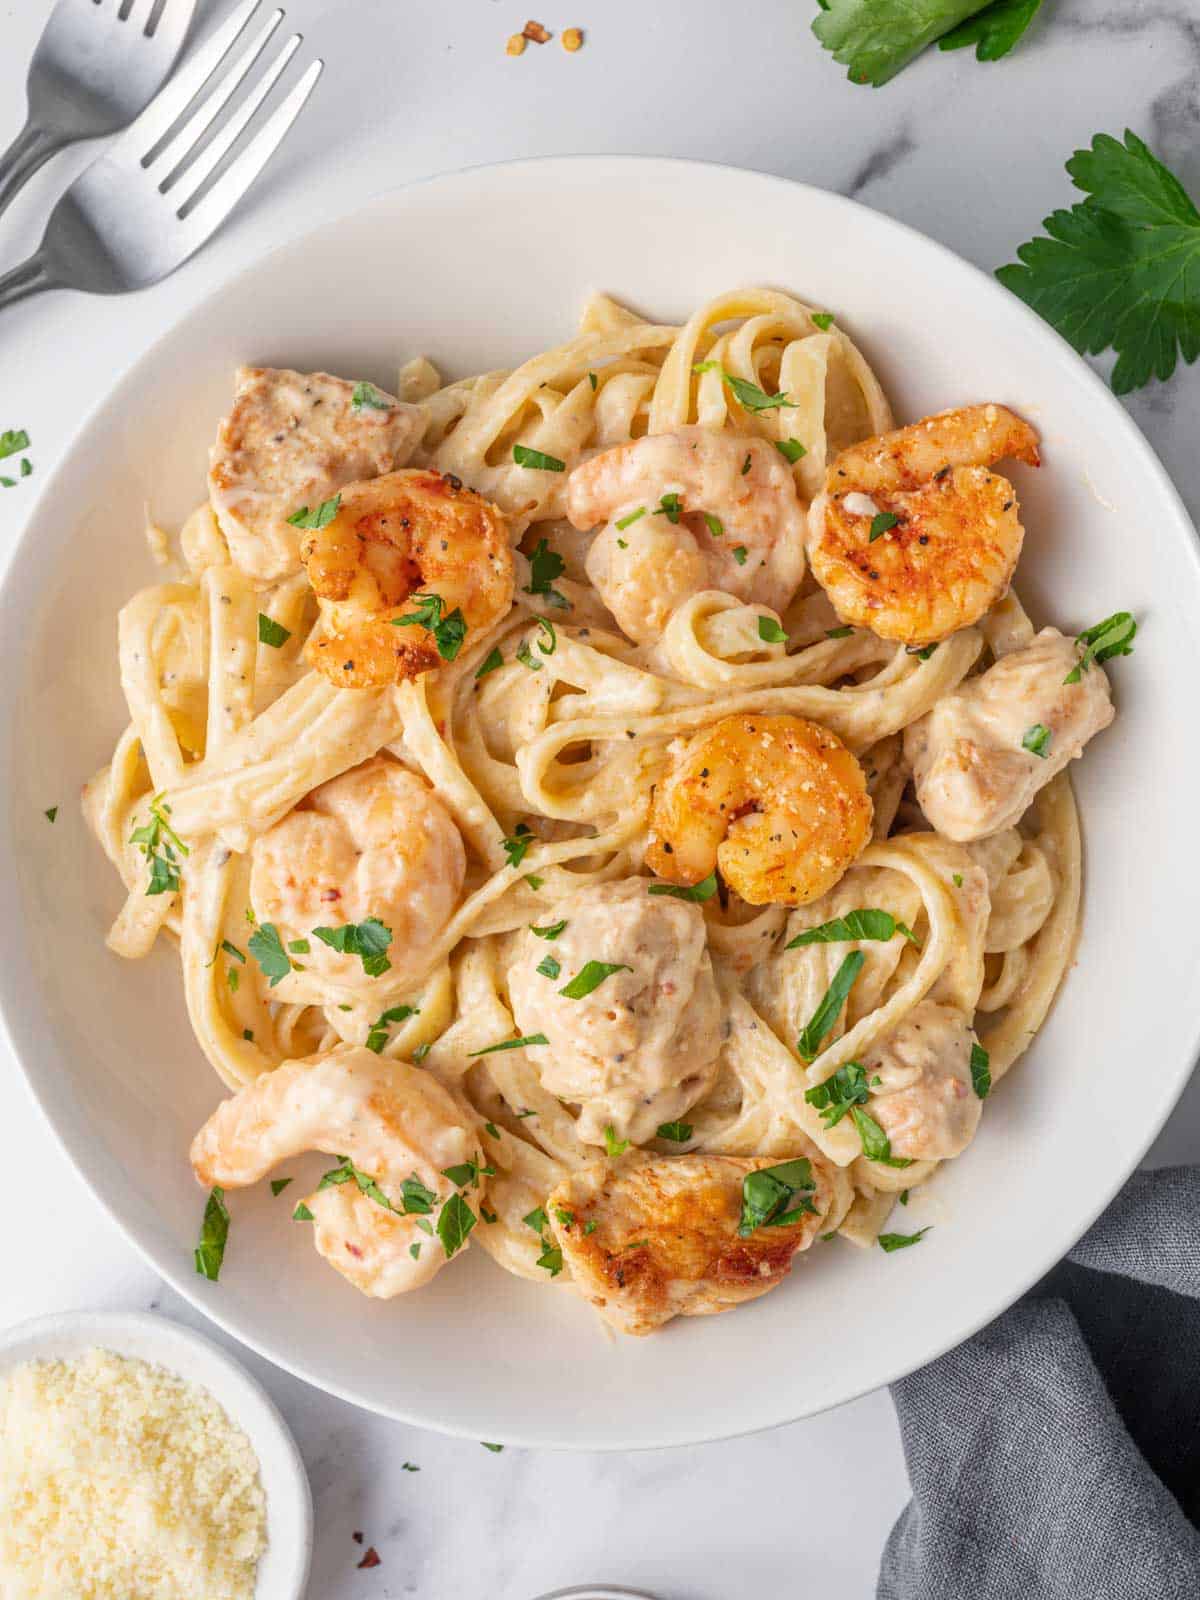 A plate of shrimp and chicken alfredo.